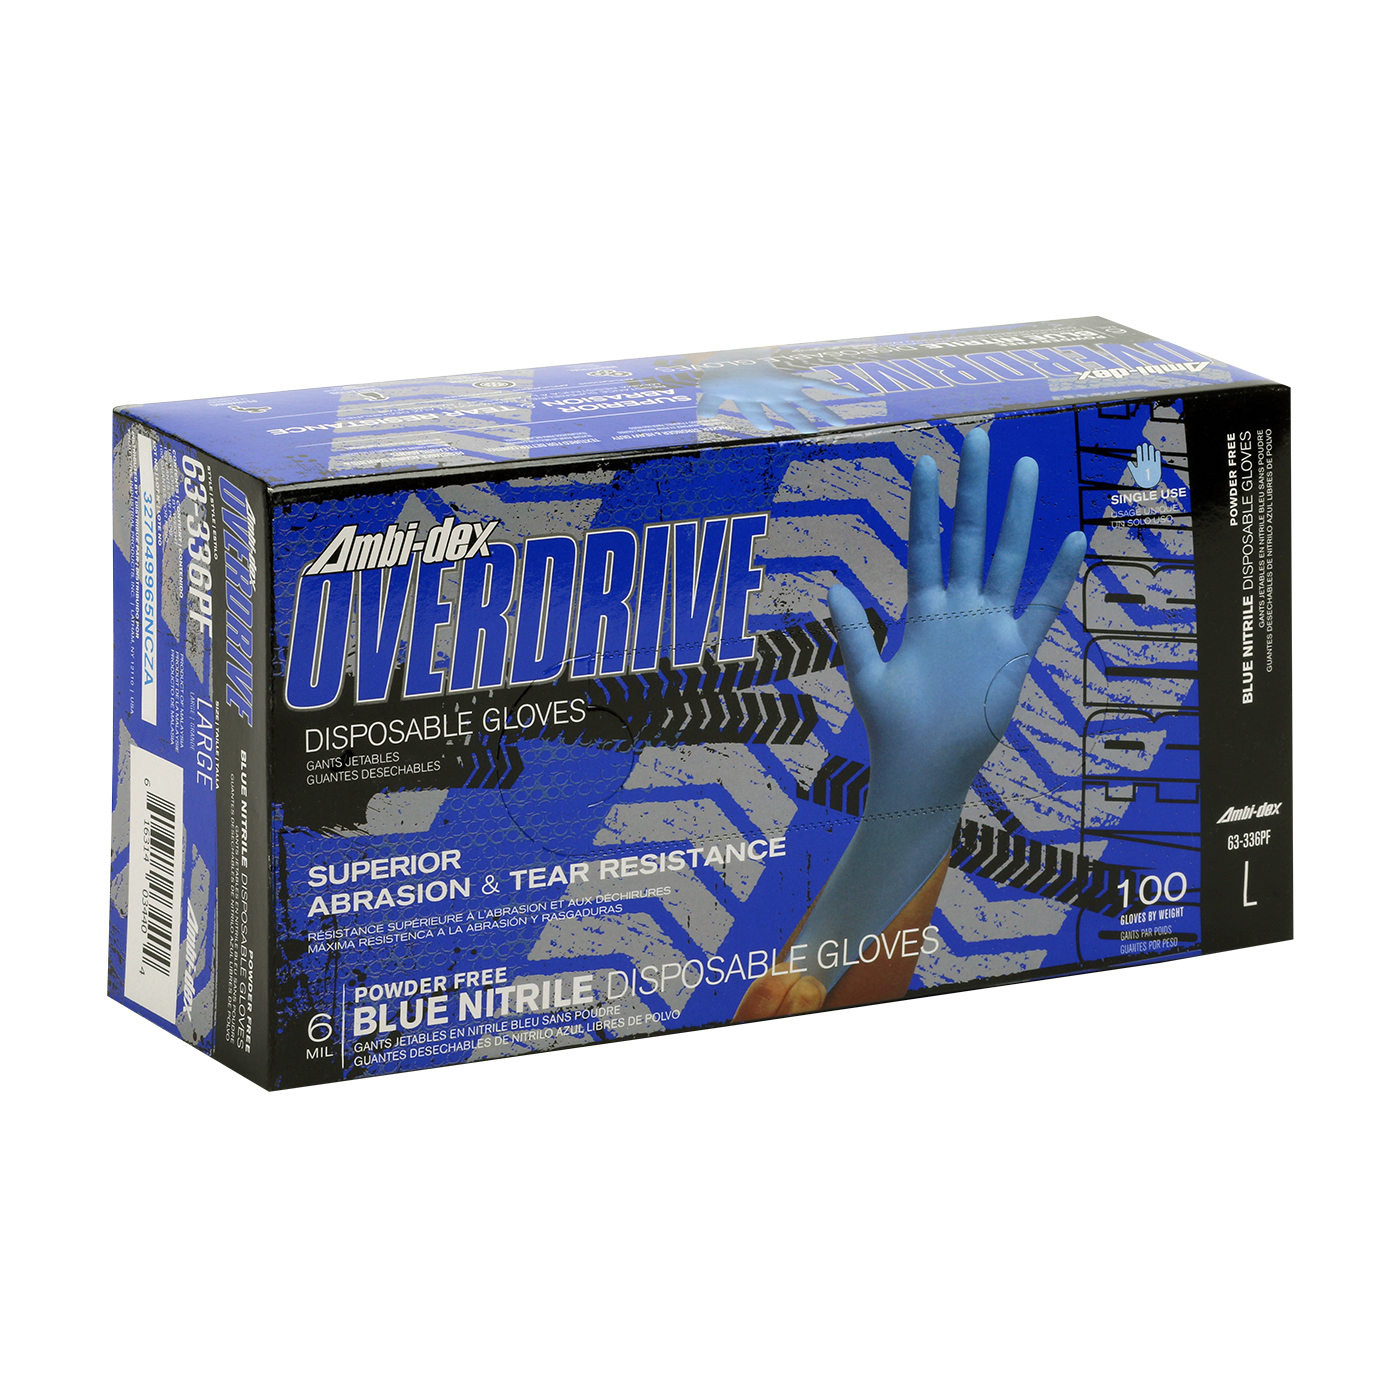 #63-336PF PIP® Ambi-dex® Overdrive Industrial Nitrile 6-Mil Gloves